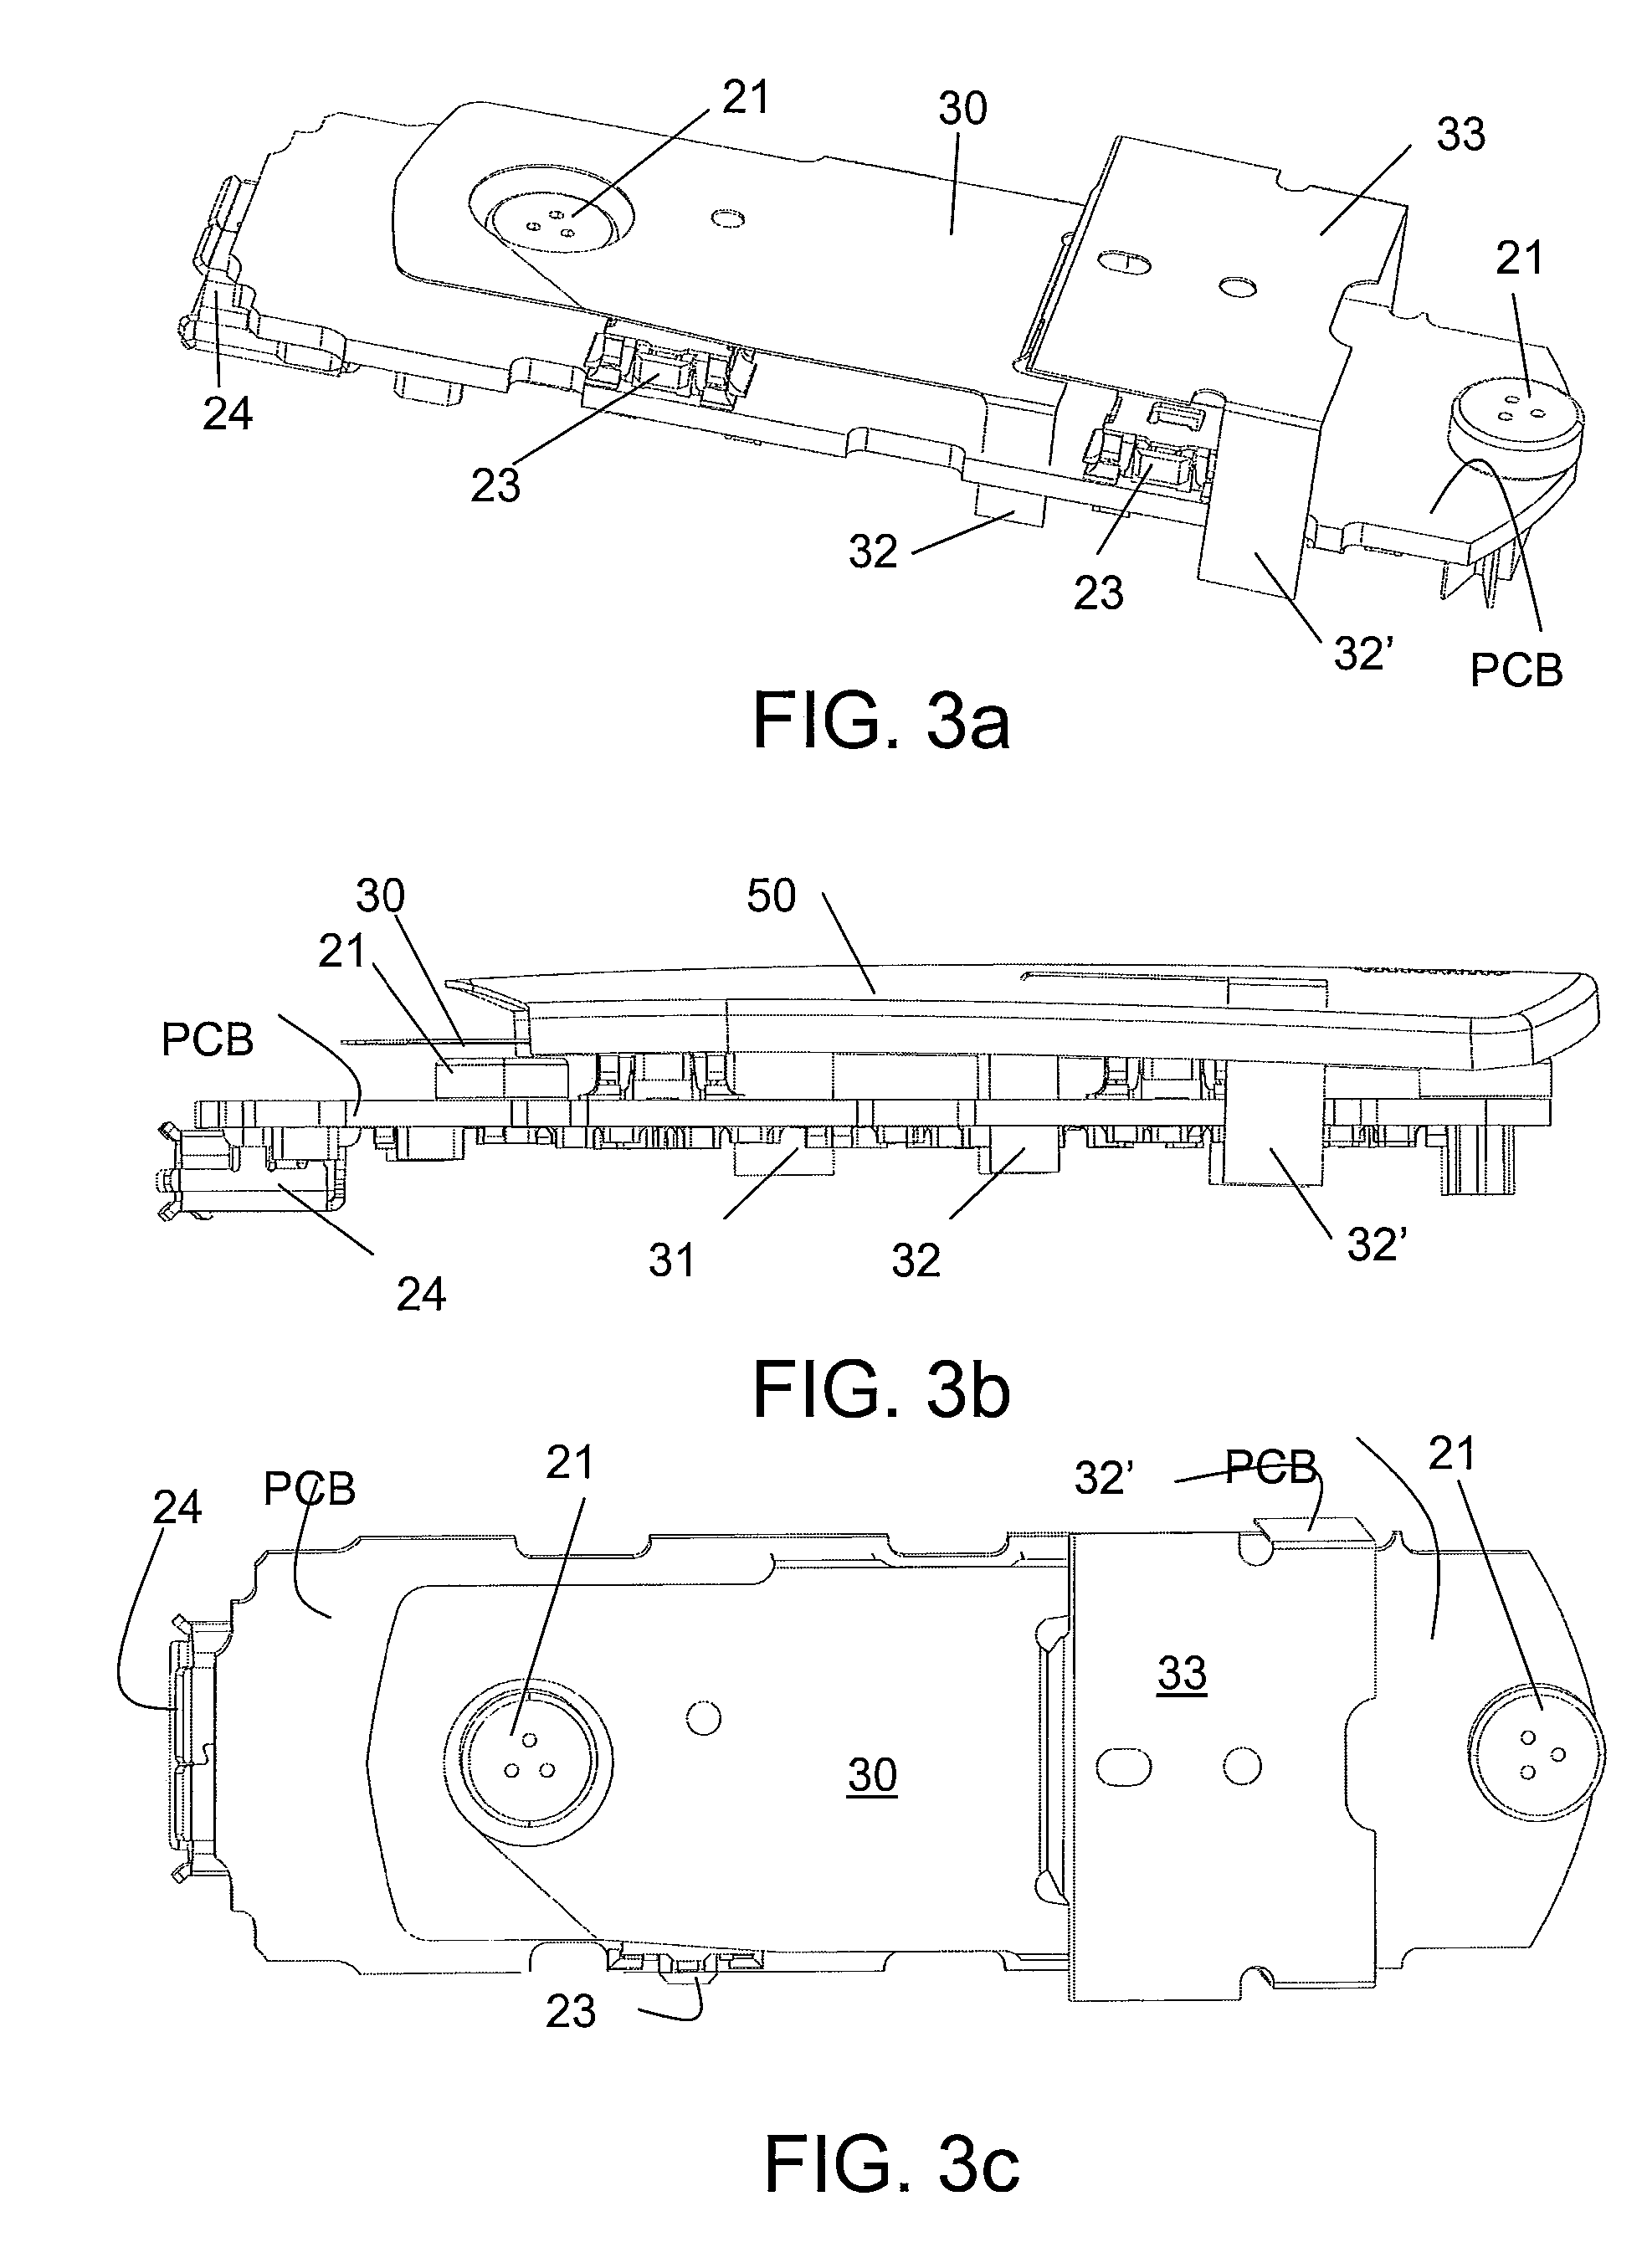 Portable communication device comprising an antenna